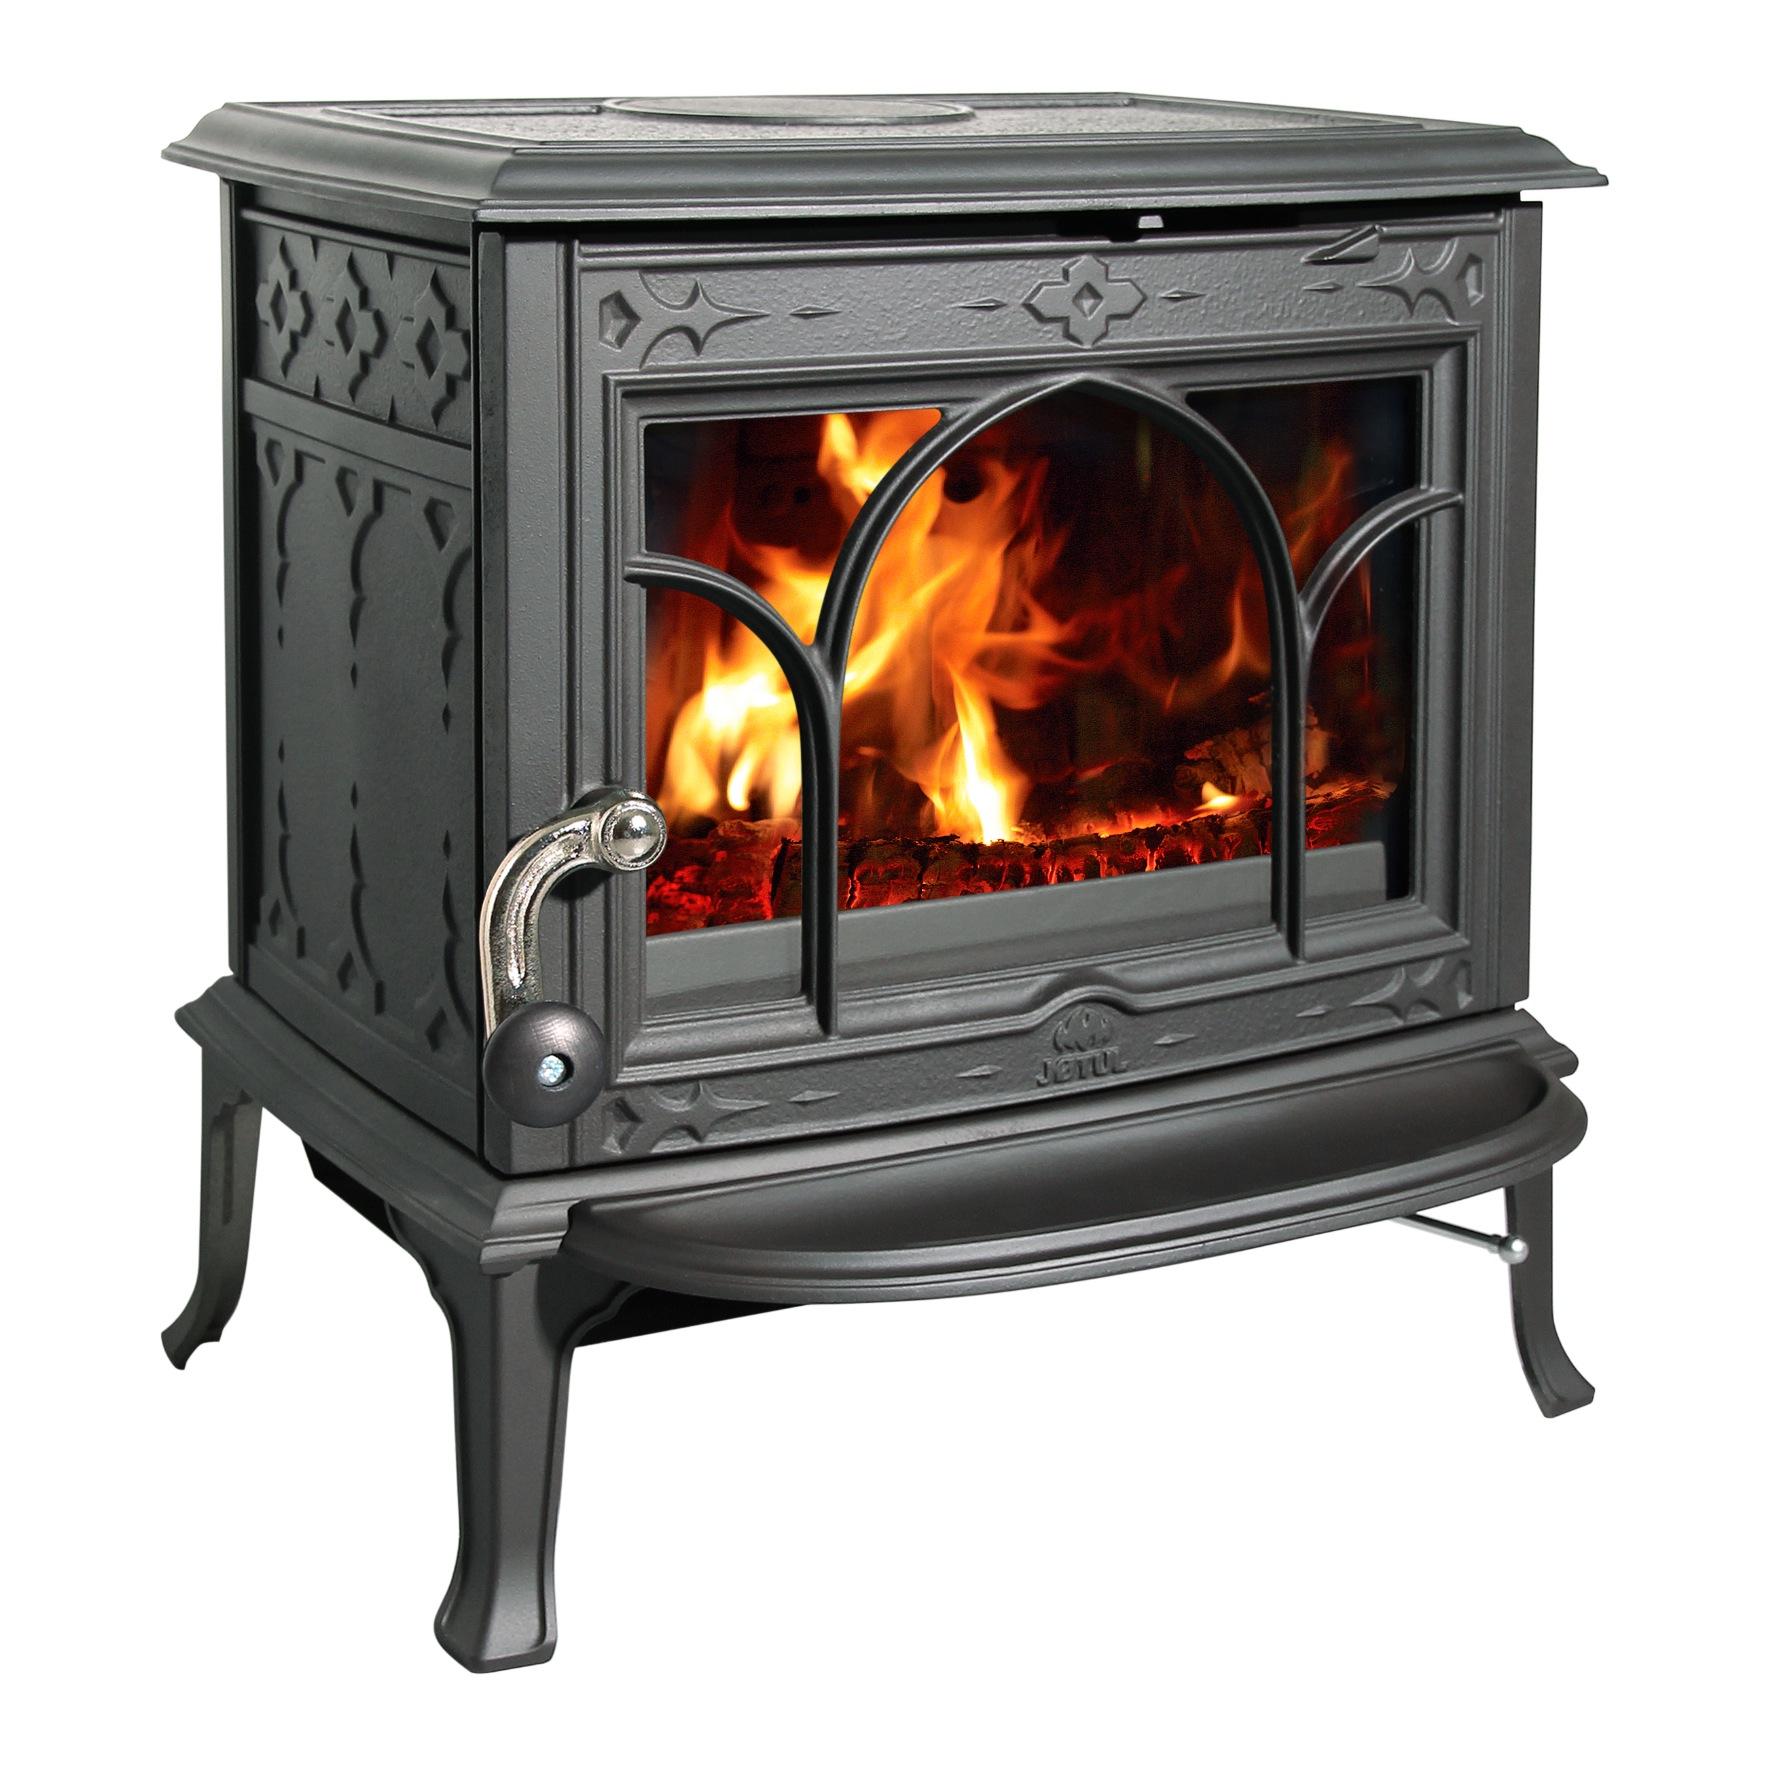 Black Swan carries a variety of products including alternative heating appliances, fireplace accessories, grills, garden decor, home decor and gifts.